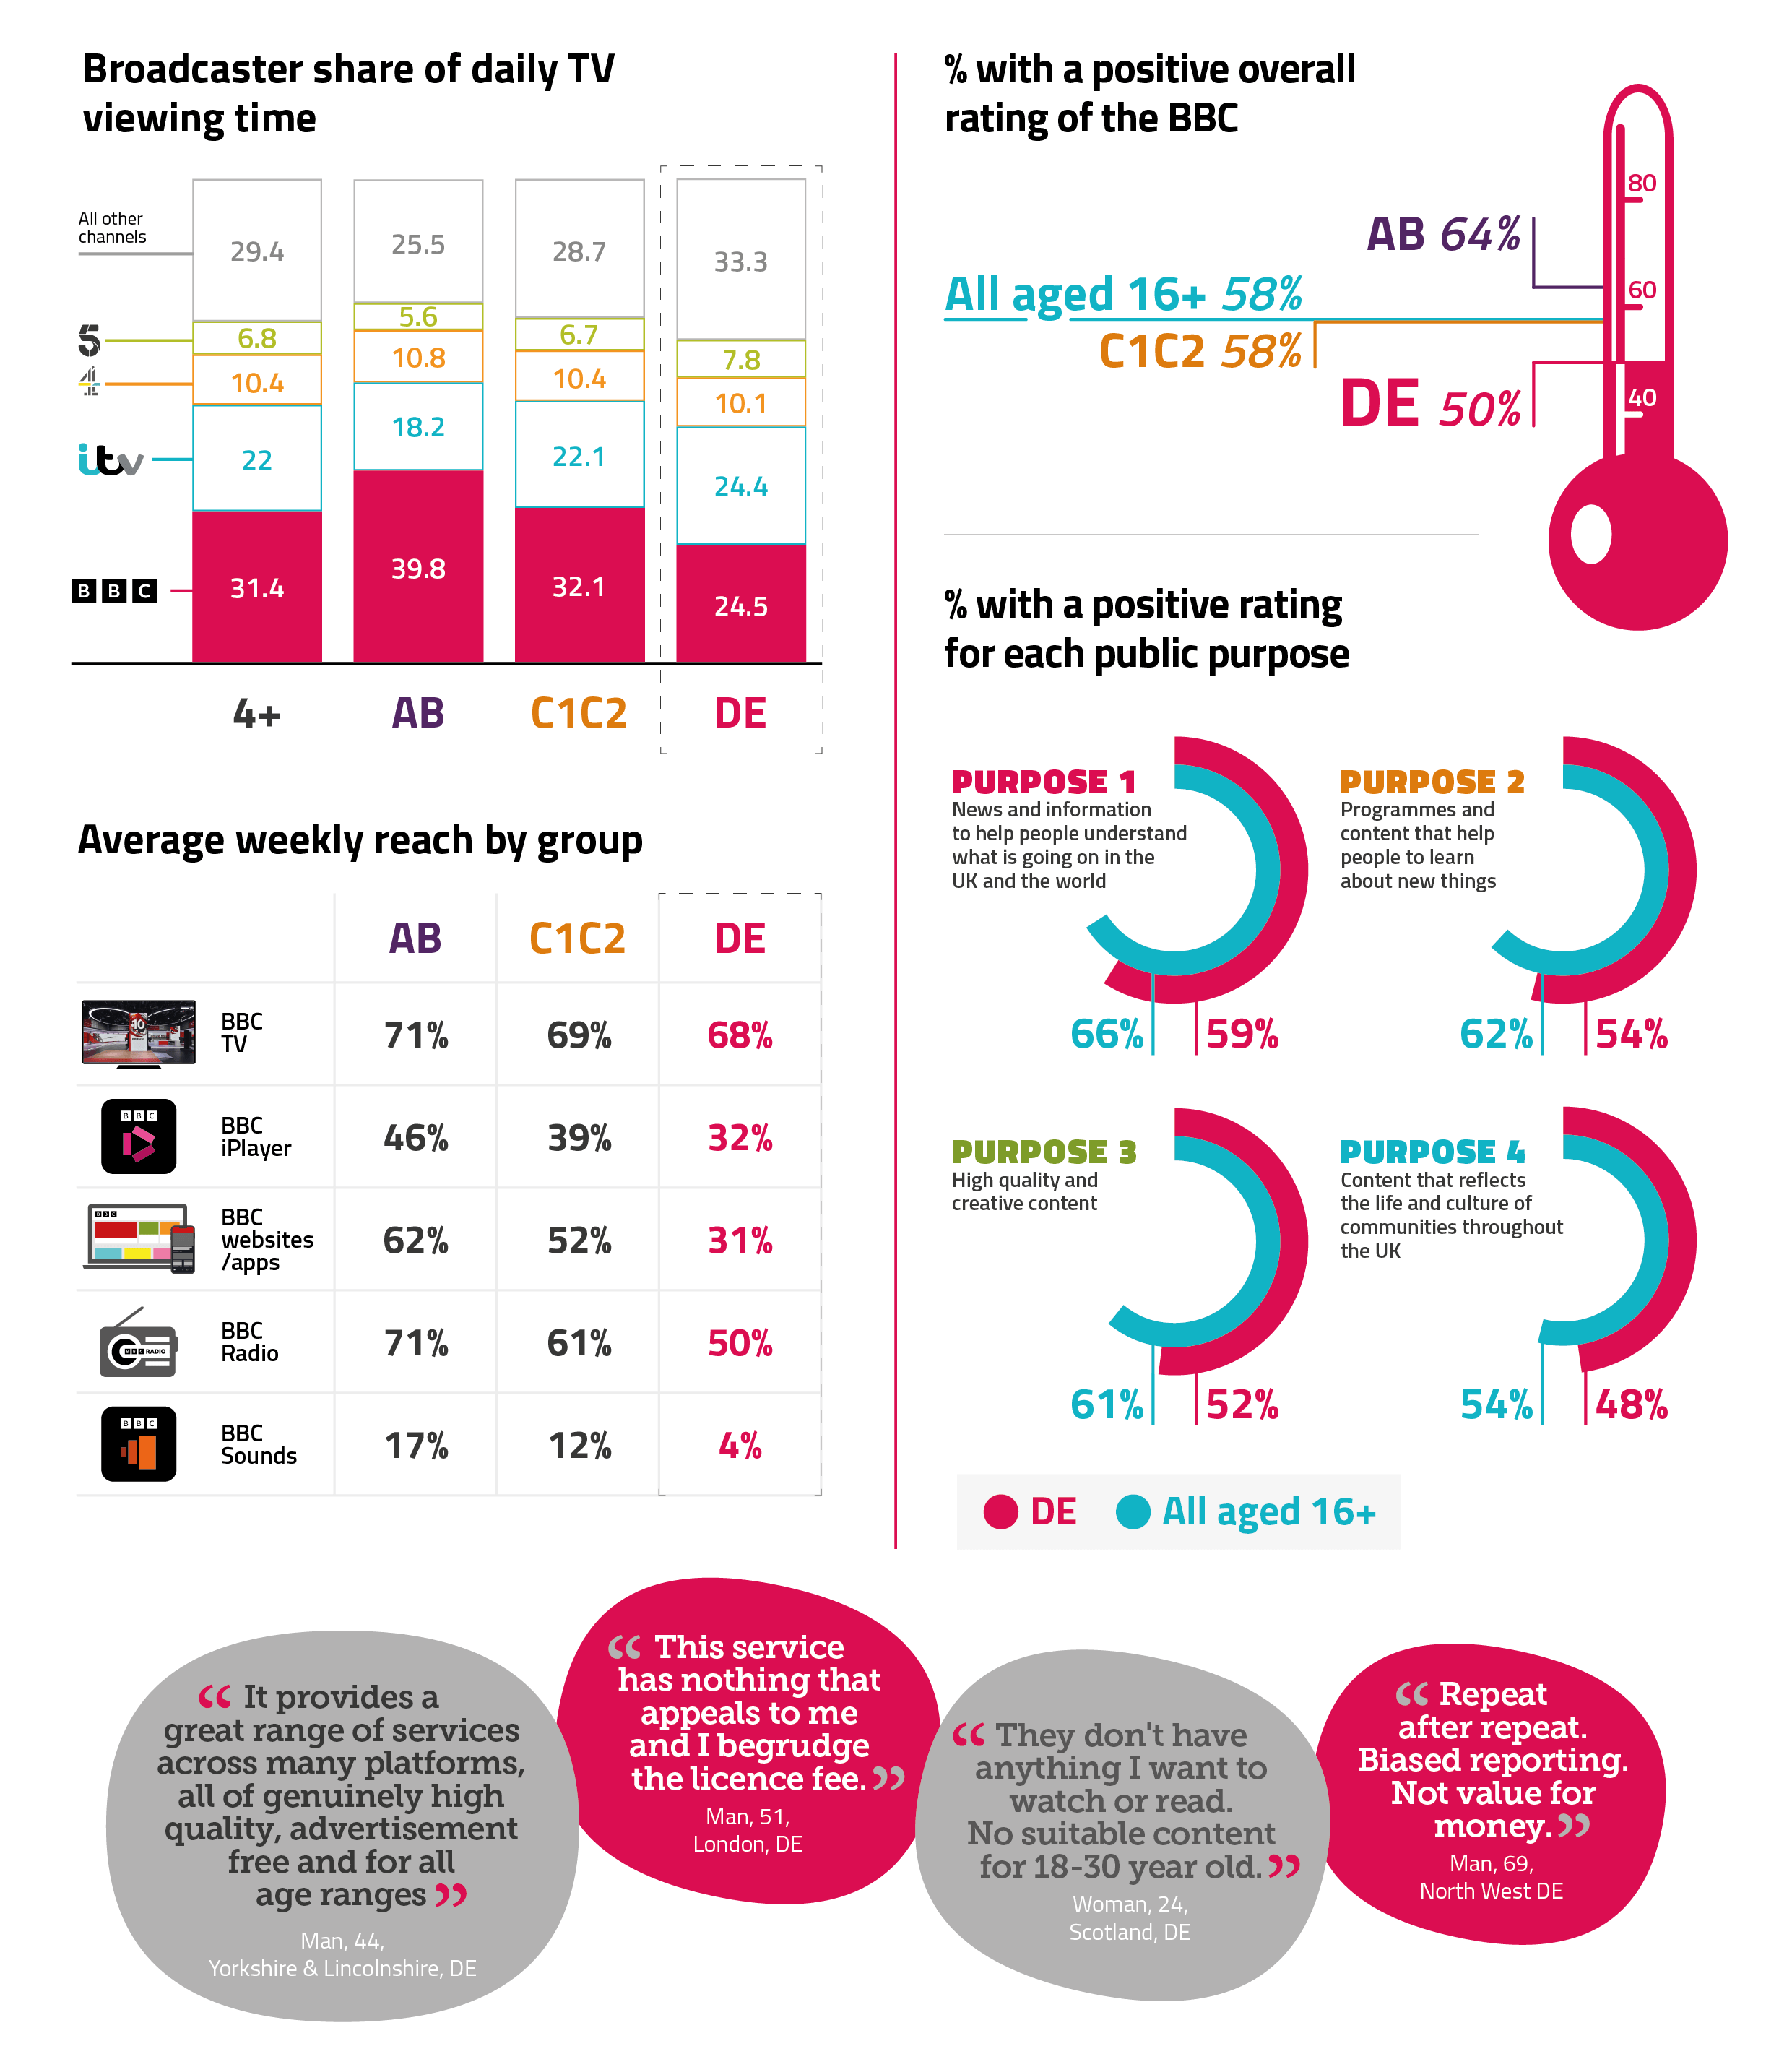 This graphic shows some metrics on the BBC and lower socio economic groups. It shows the broadcaster share of daily TV viewing time comparing the BBC, ITV, Channel 4 and Channel 5. It also shows average weekly reach by audiences from different socio-economic groups; as well as perceptions of the BBC. 